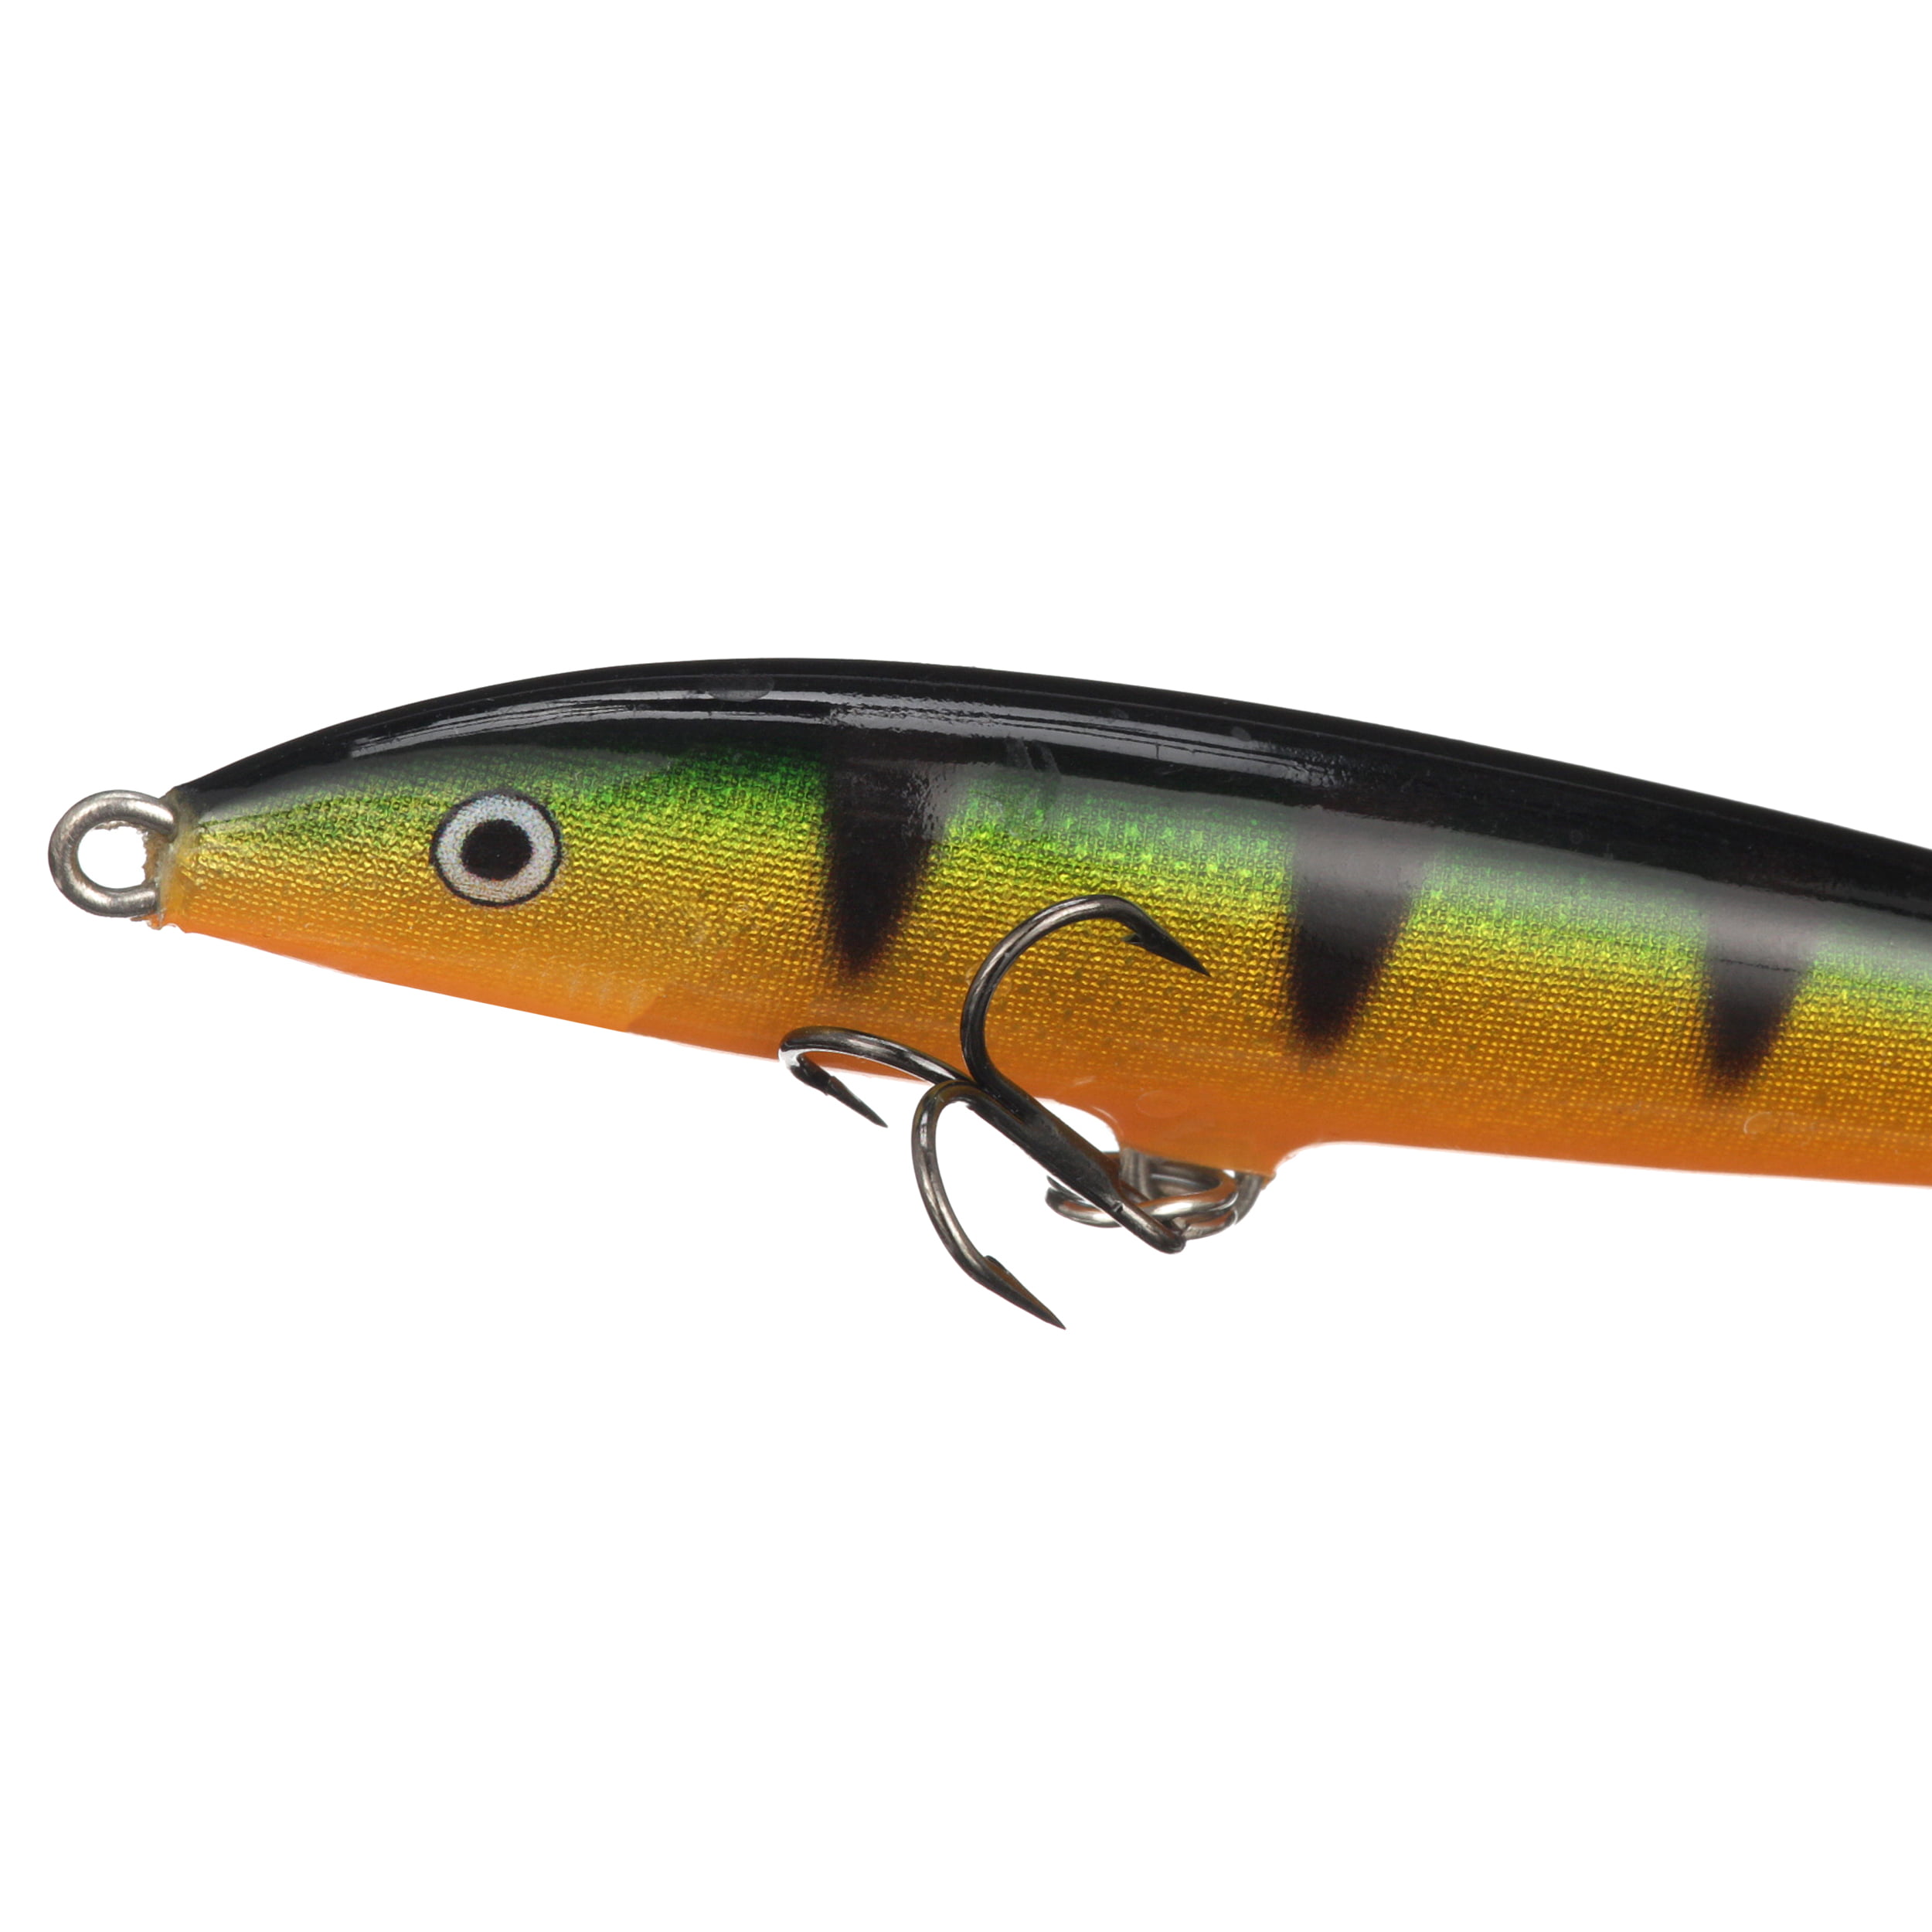 YUEXIN Floating Minnow 16cm/20.7g Killer Peacock Bass Fishing lure